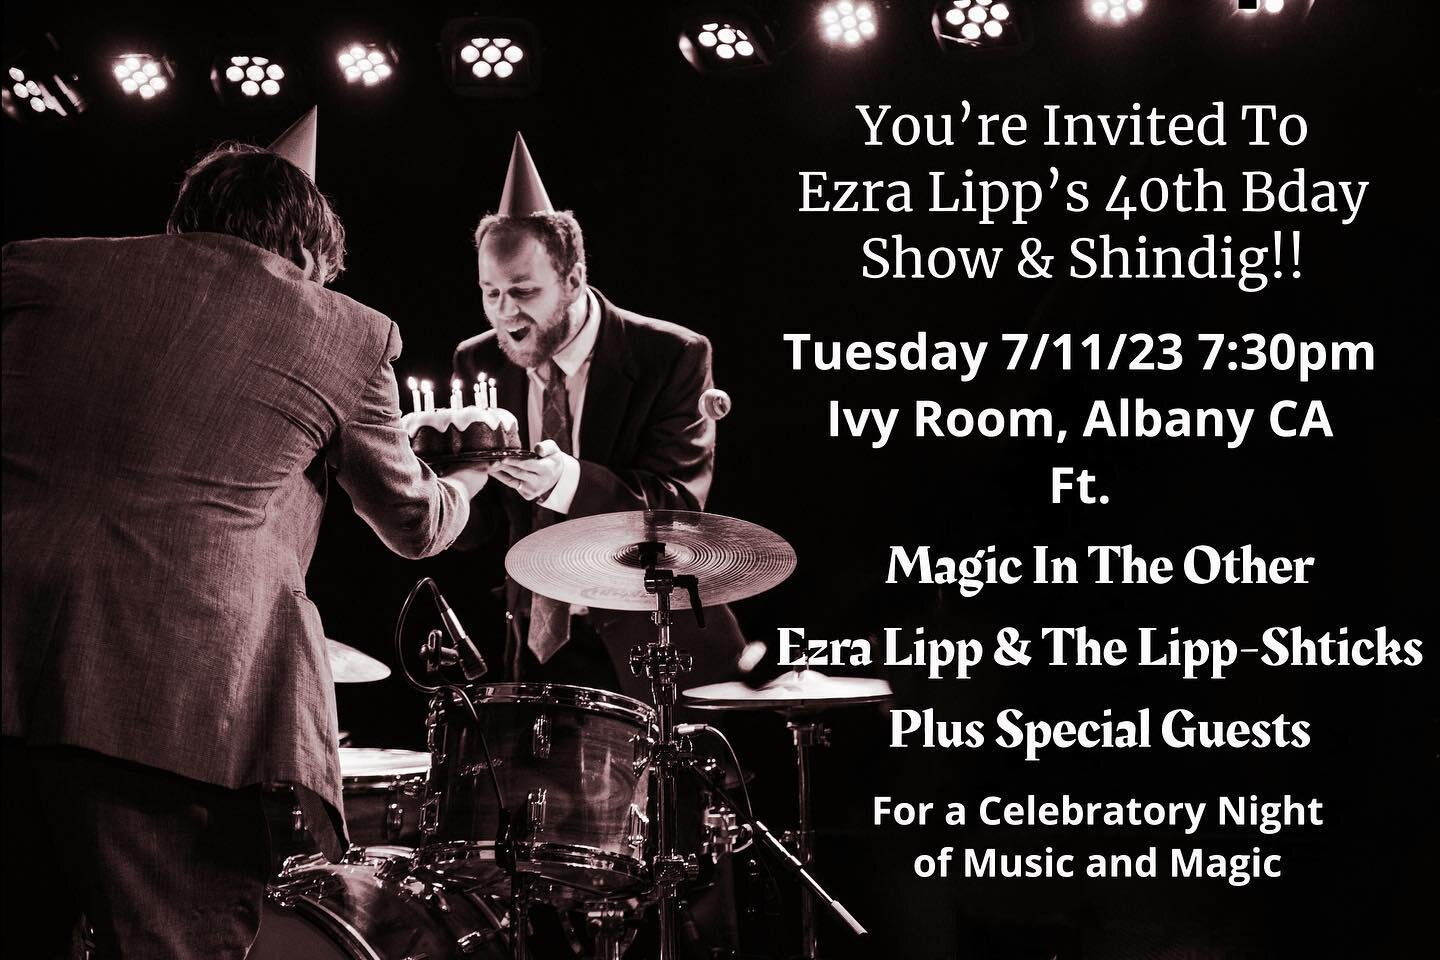 Getting the band back together for a special celebratory event of @ezralipp &lsquo;s 40th!! Hope to see y&rsquo;all there!!